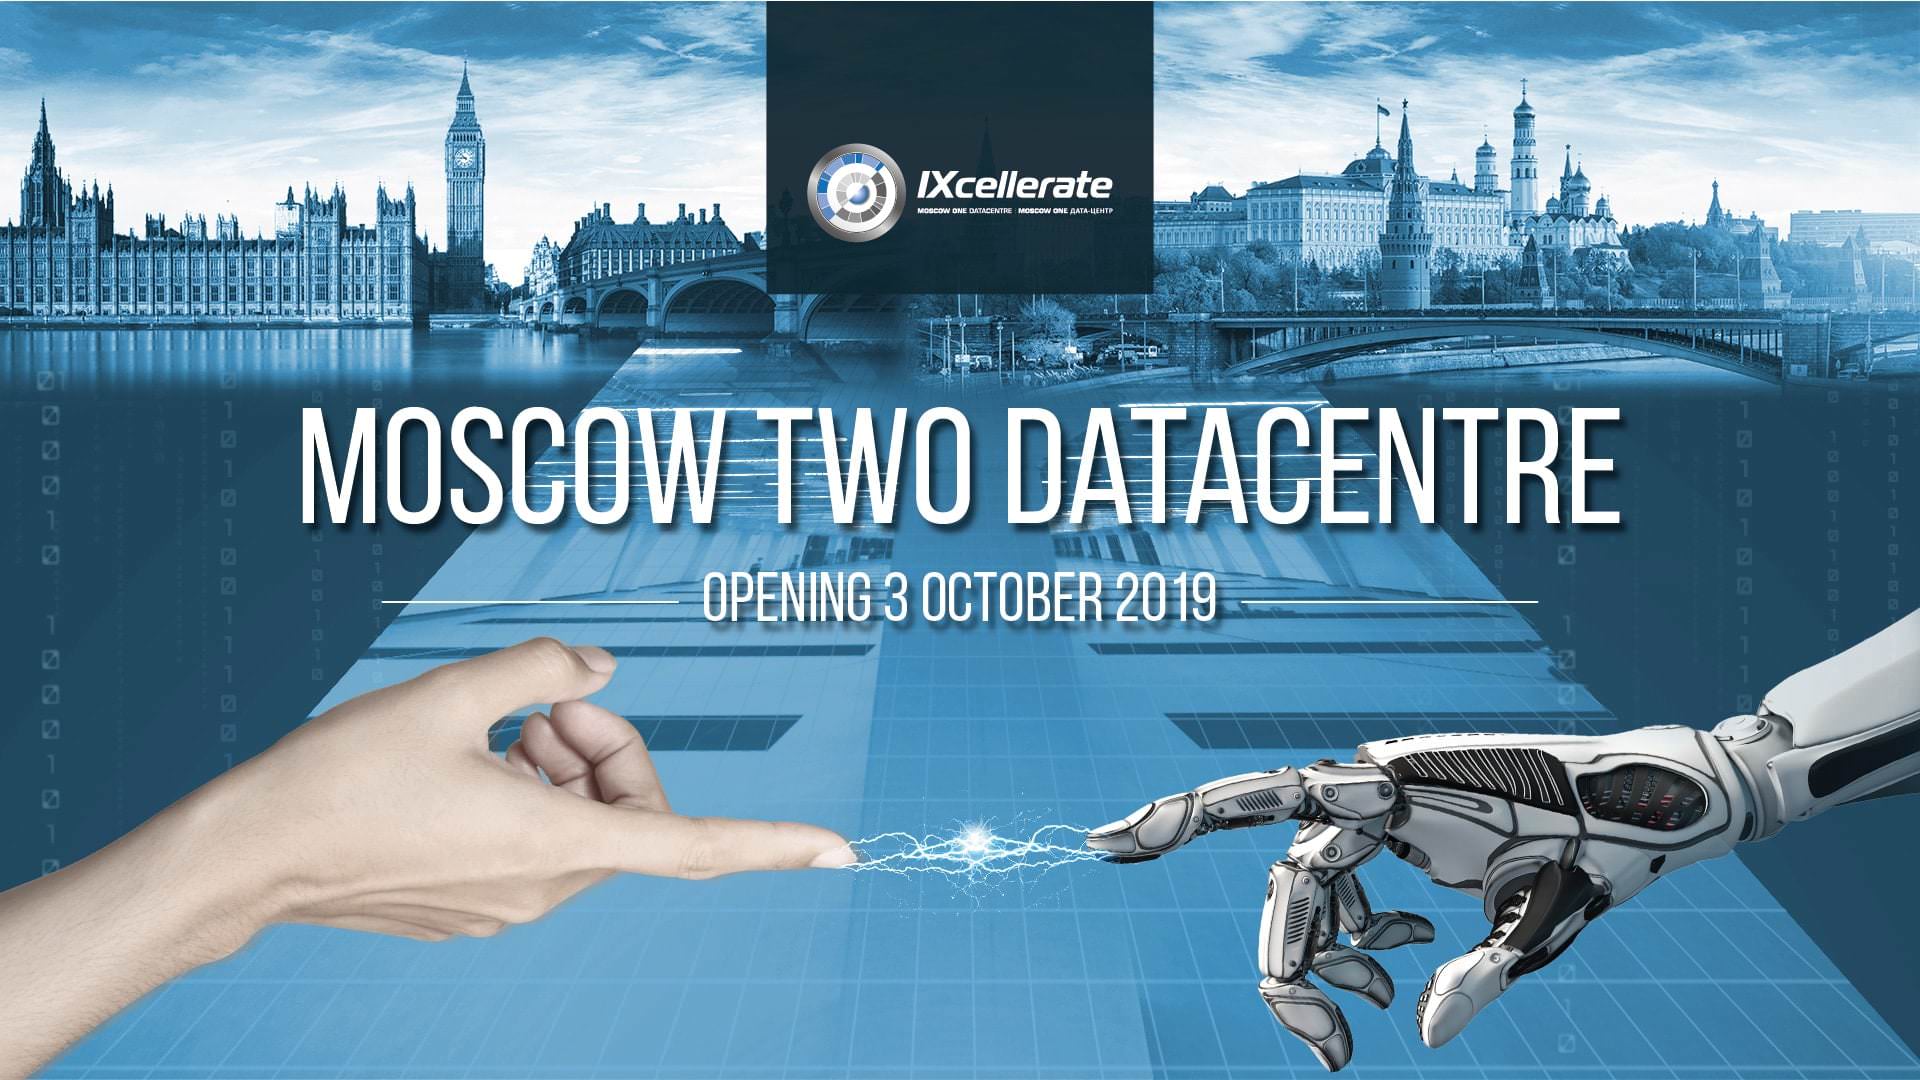 IXcellerate Moscow Two Datacentre opening